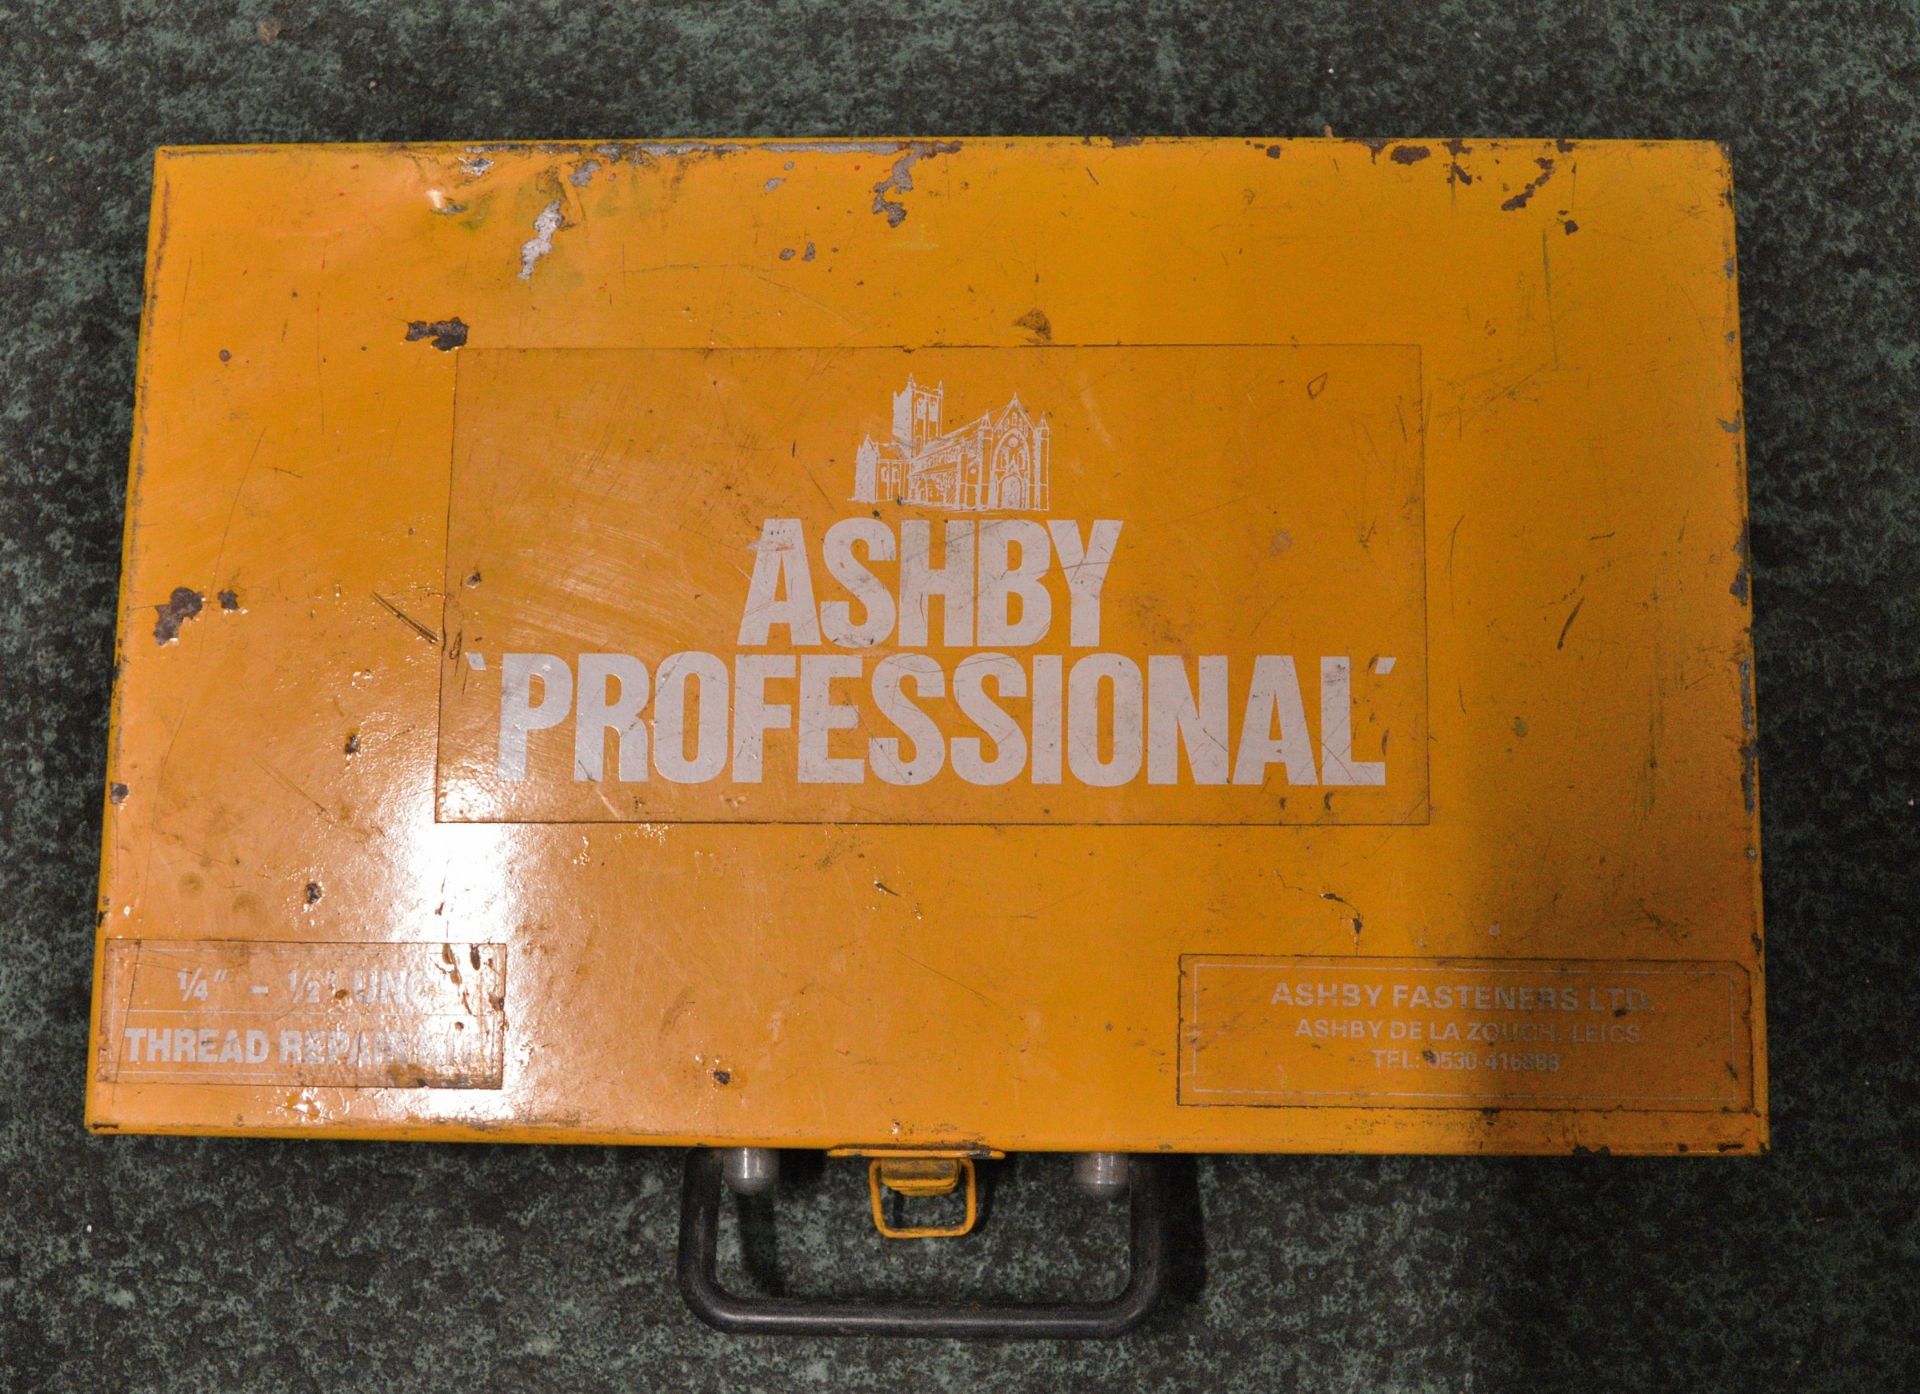 Ashby Professional UNC thread repair kit - incomplete - Image 3 of 3